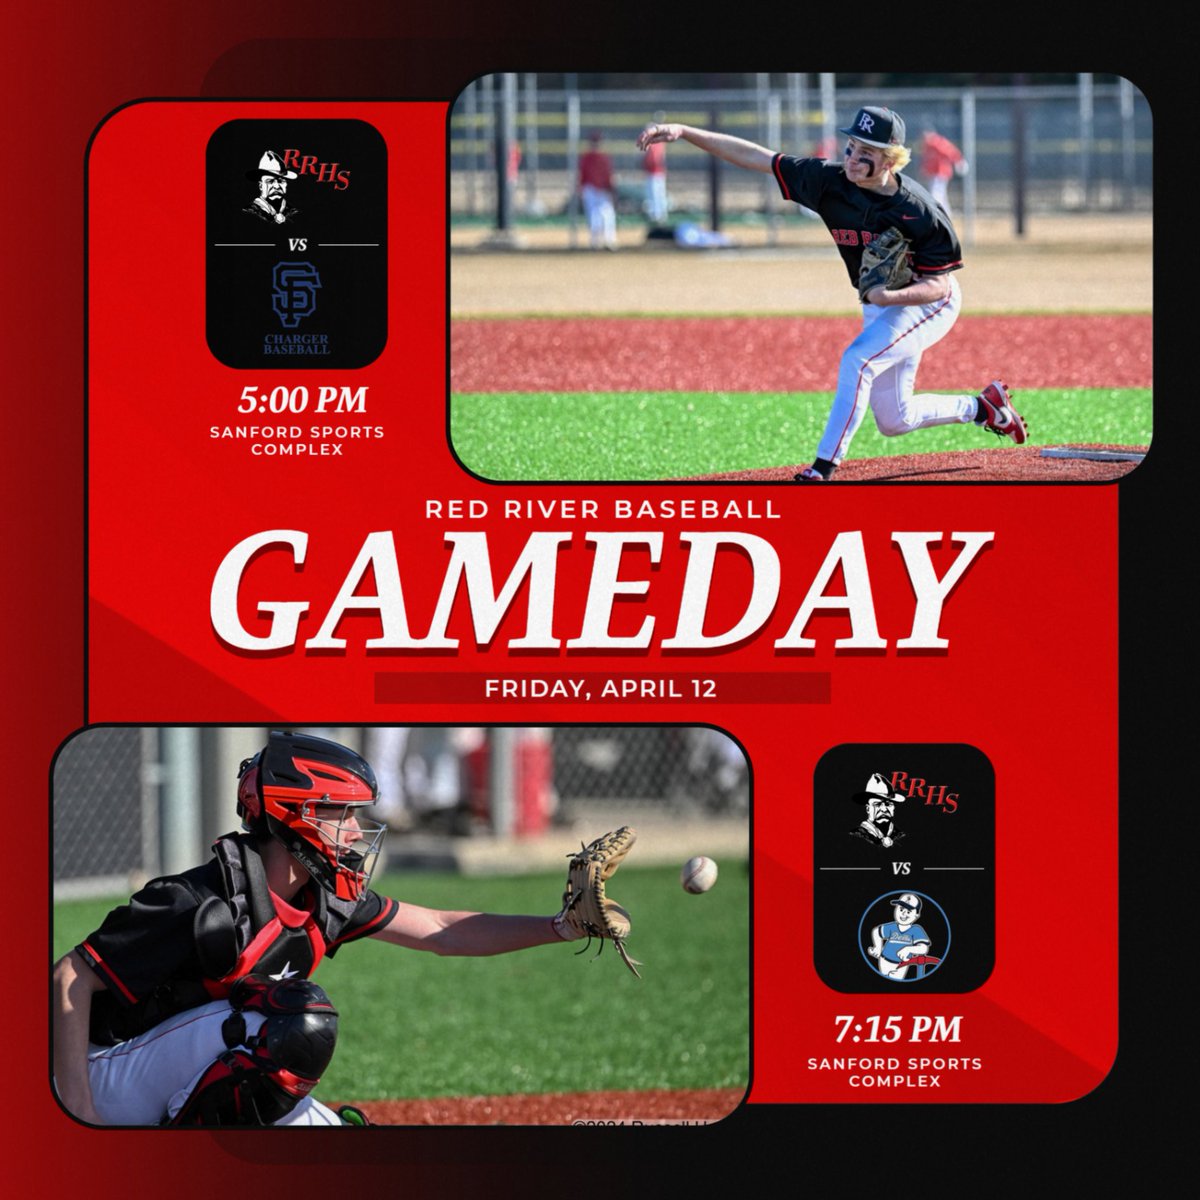 Riders Gameday! The Riders will play SF Christian at 5:00pm and Dell Rapids at 7:15pm. Both games will be played at Sanford Sports Complex in Sioux Falls, SD.